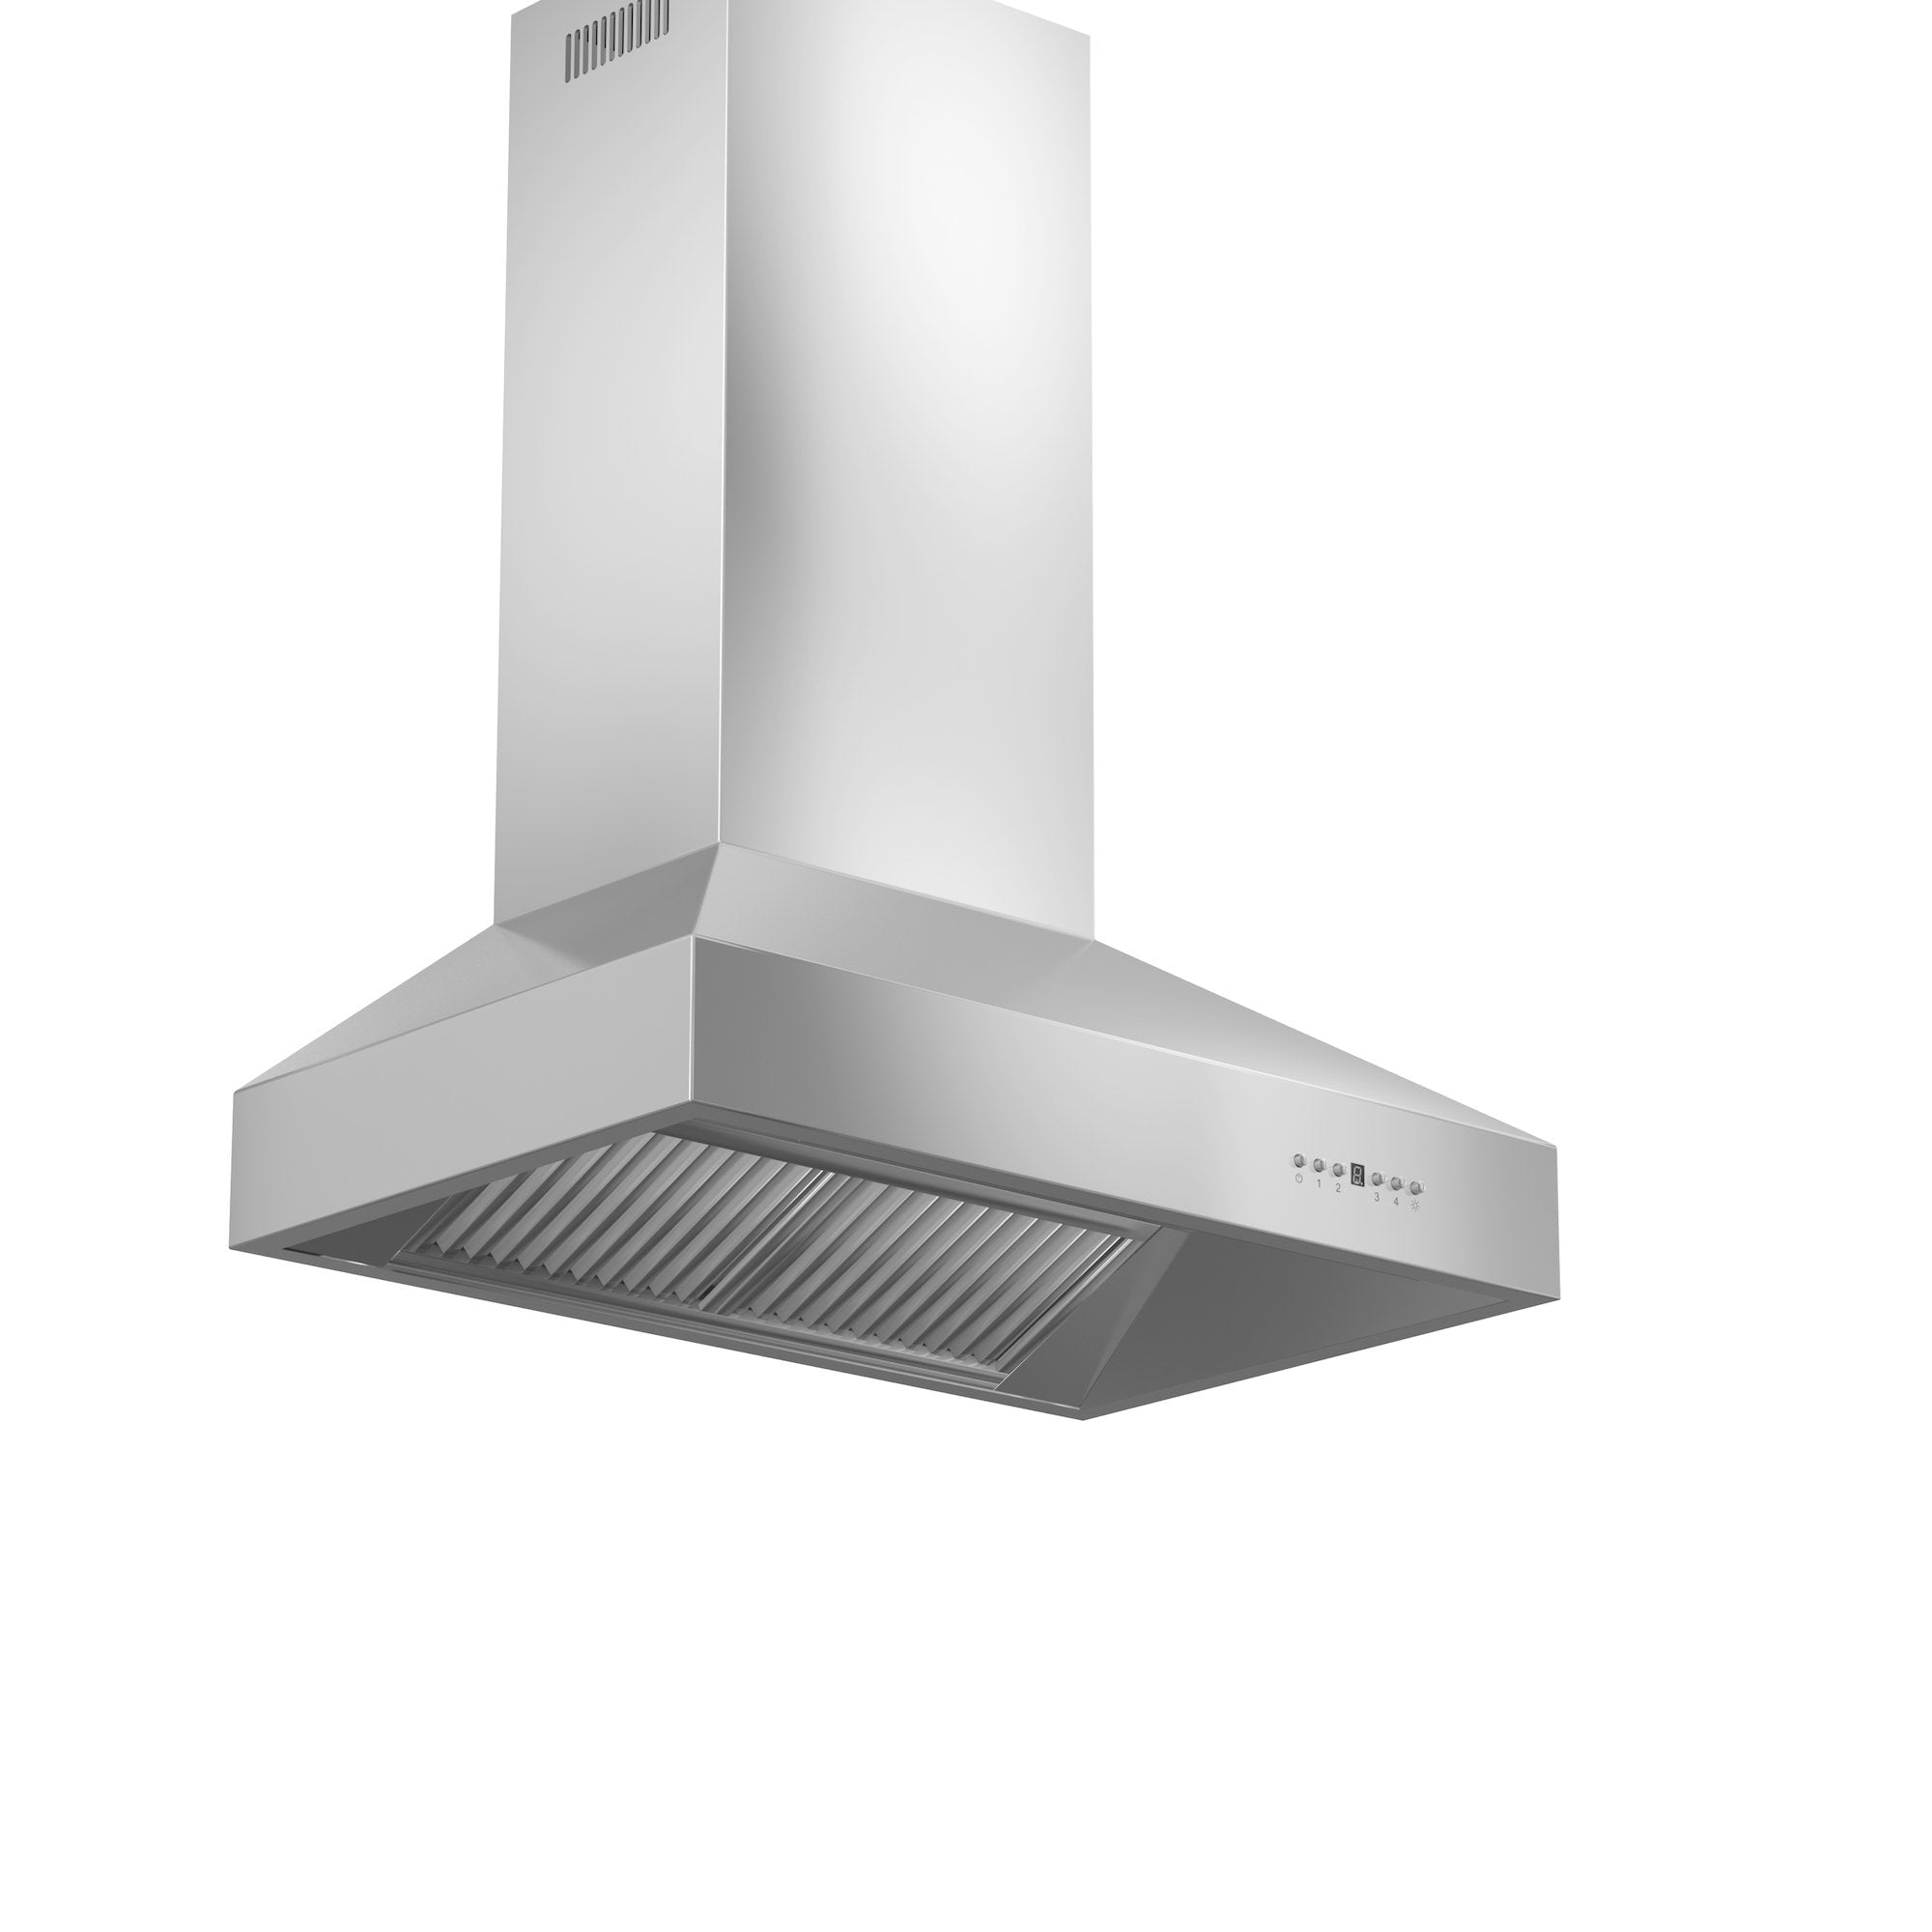 ZLINE Ducted Wall Mount Range Hood in Outdoor Approved Stainless Steel (697-304) side, under.